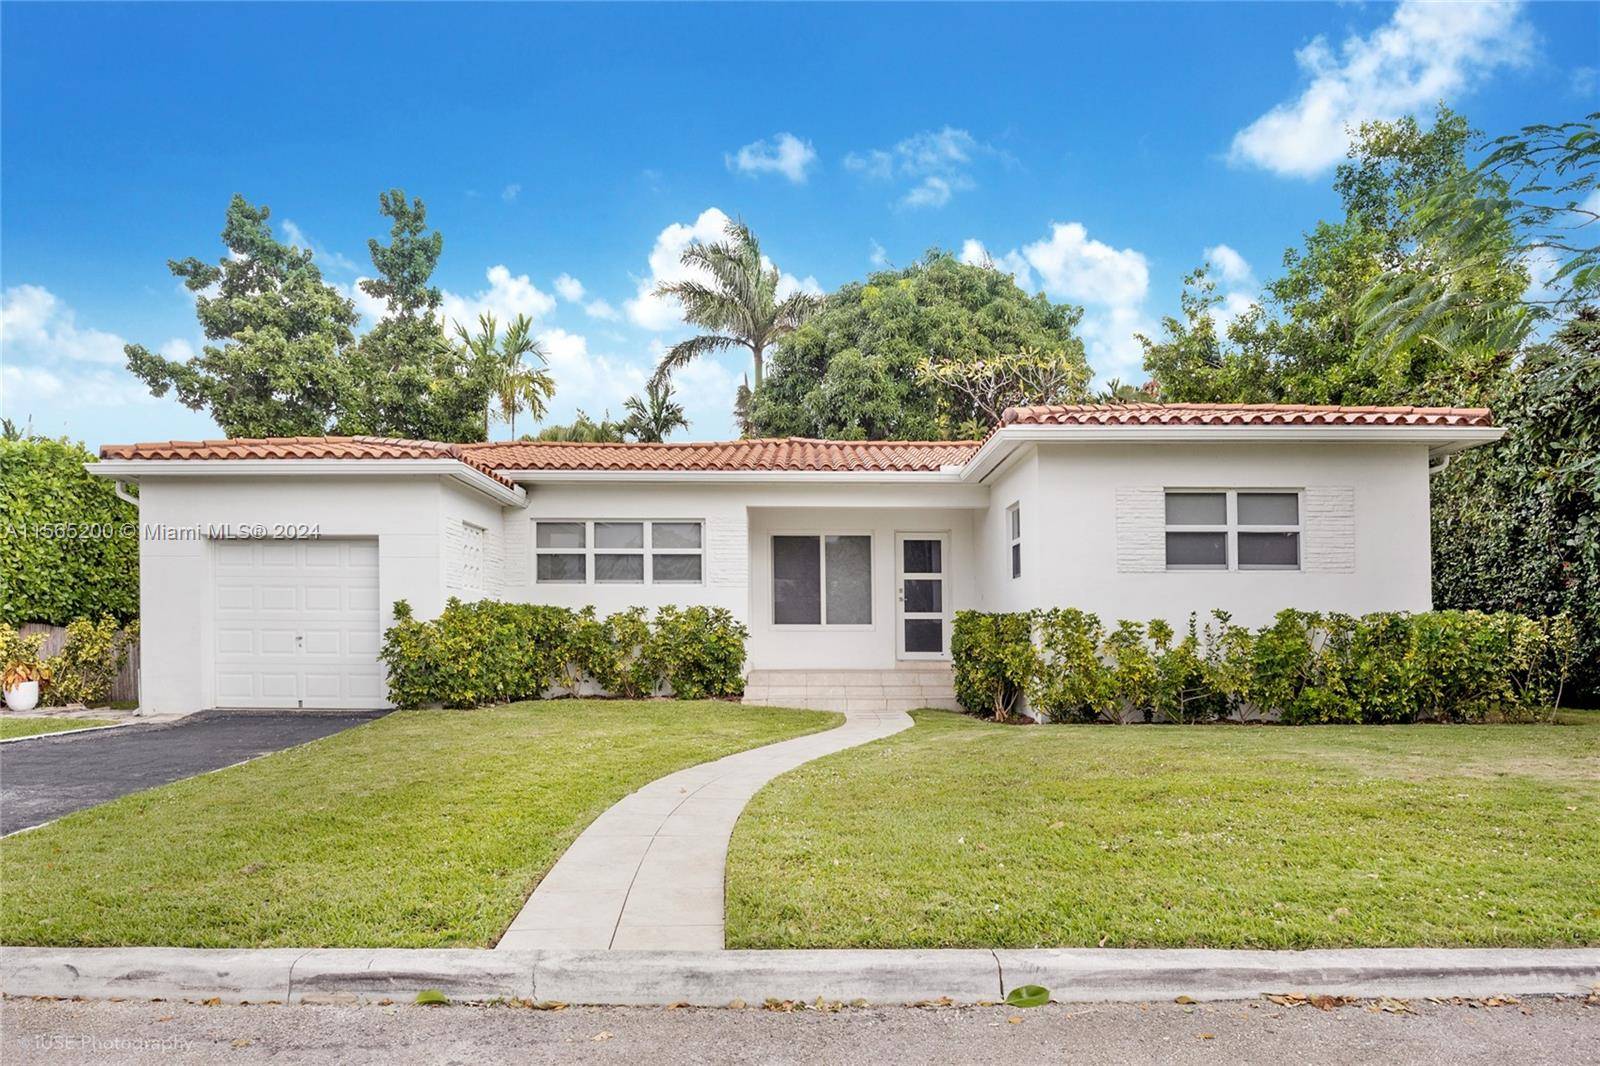 Beautiful, cozy home in the safe town of Bay Harbor Islands with great schools.